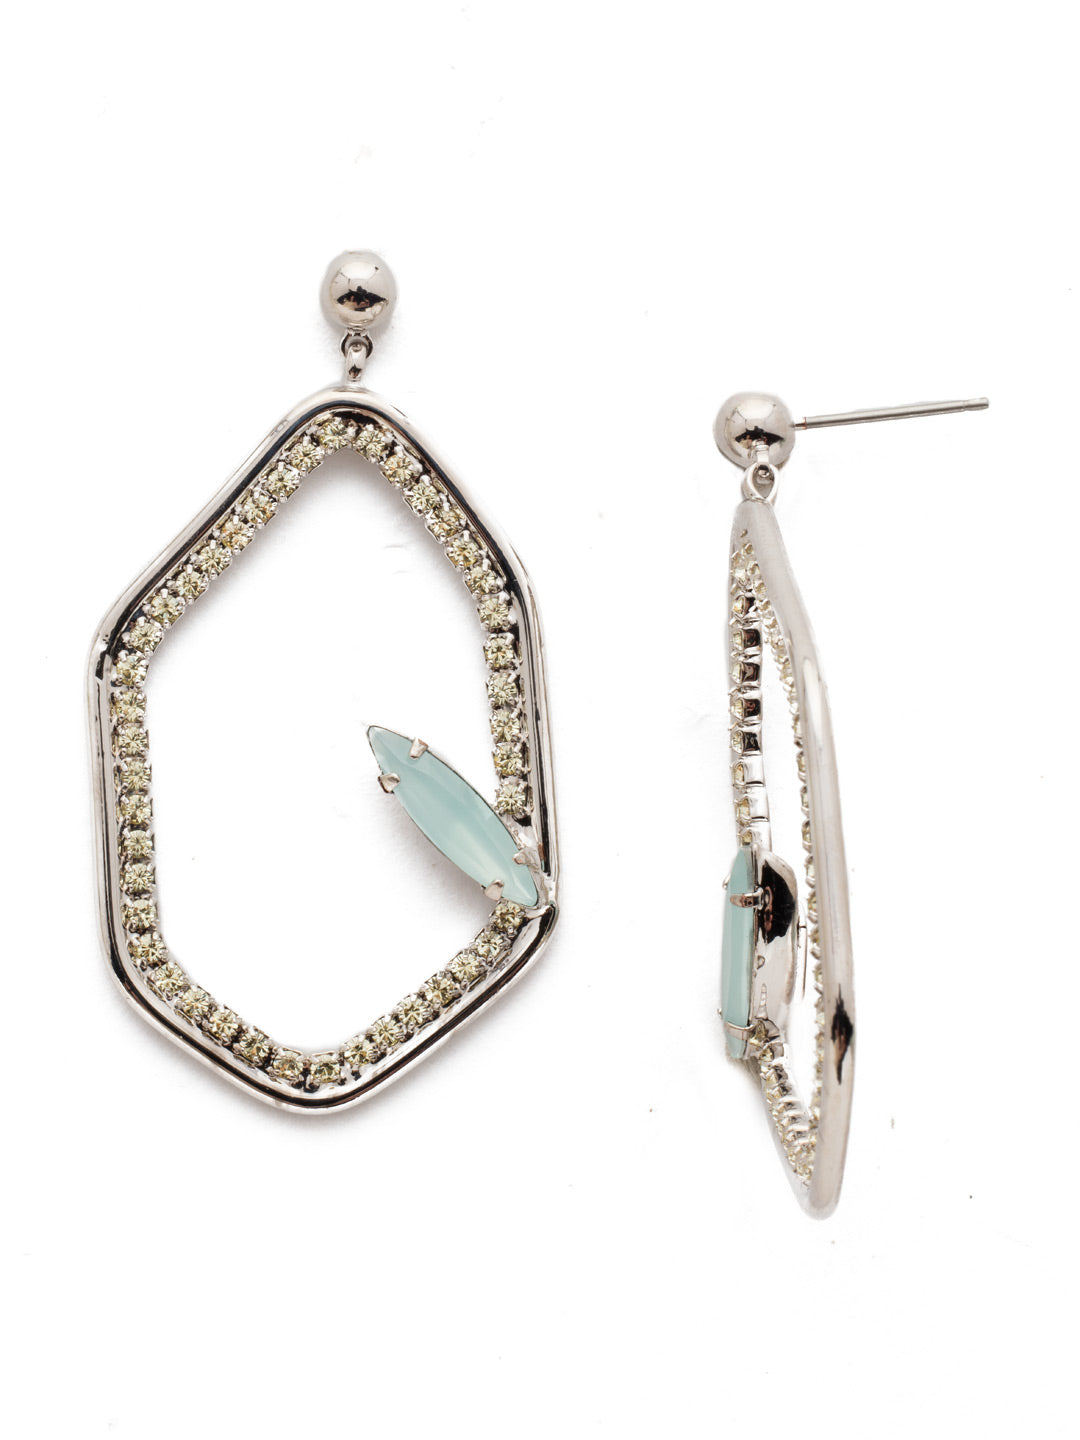 Gemma Dangle Earrings - EEH28RHTHT - <p>These posts are long on style. Fasten on the fun shape surrounded by sparkling crystal pieces and you're sure to be the center of attention. From Sorrelli's Tahitian Treat collection in our Palladium Silver-tone finish.</p>